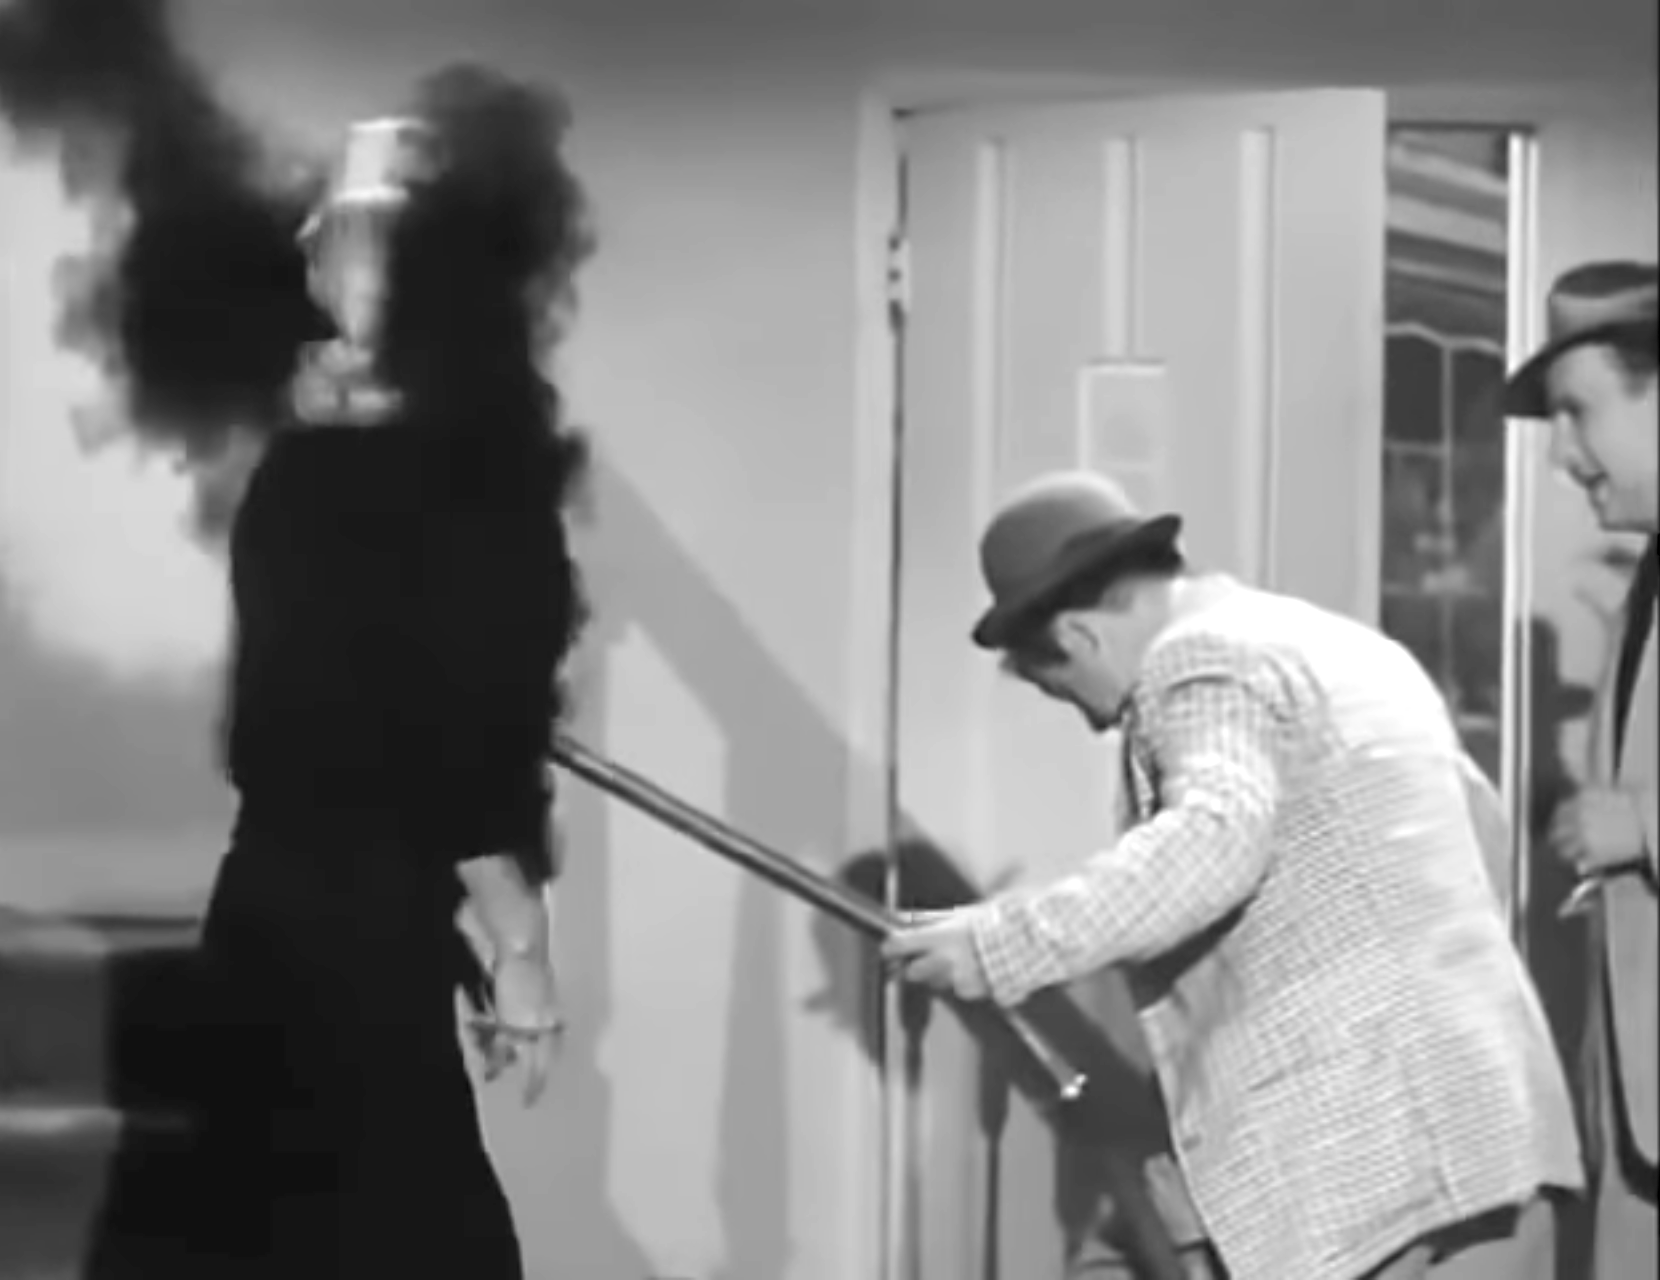 The Vacuum Cleaner Salesman - The Abbott and Costello Show, season 1